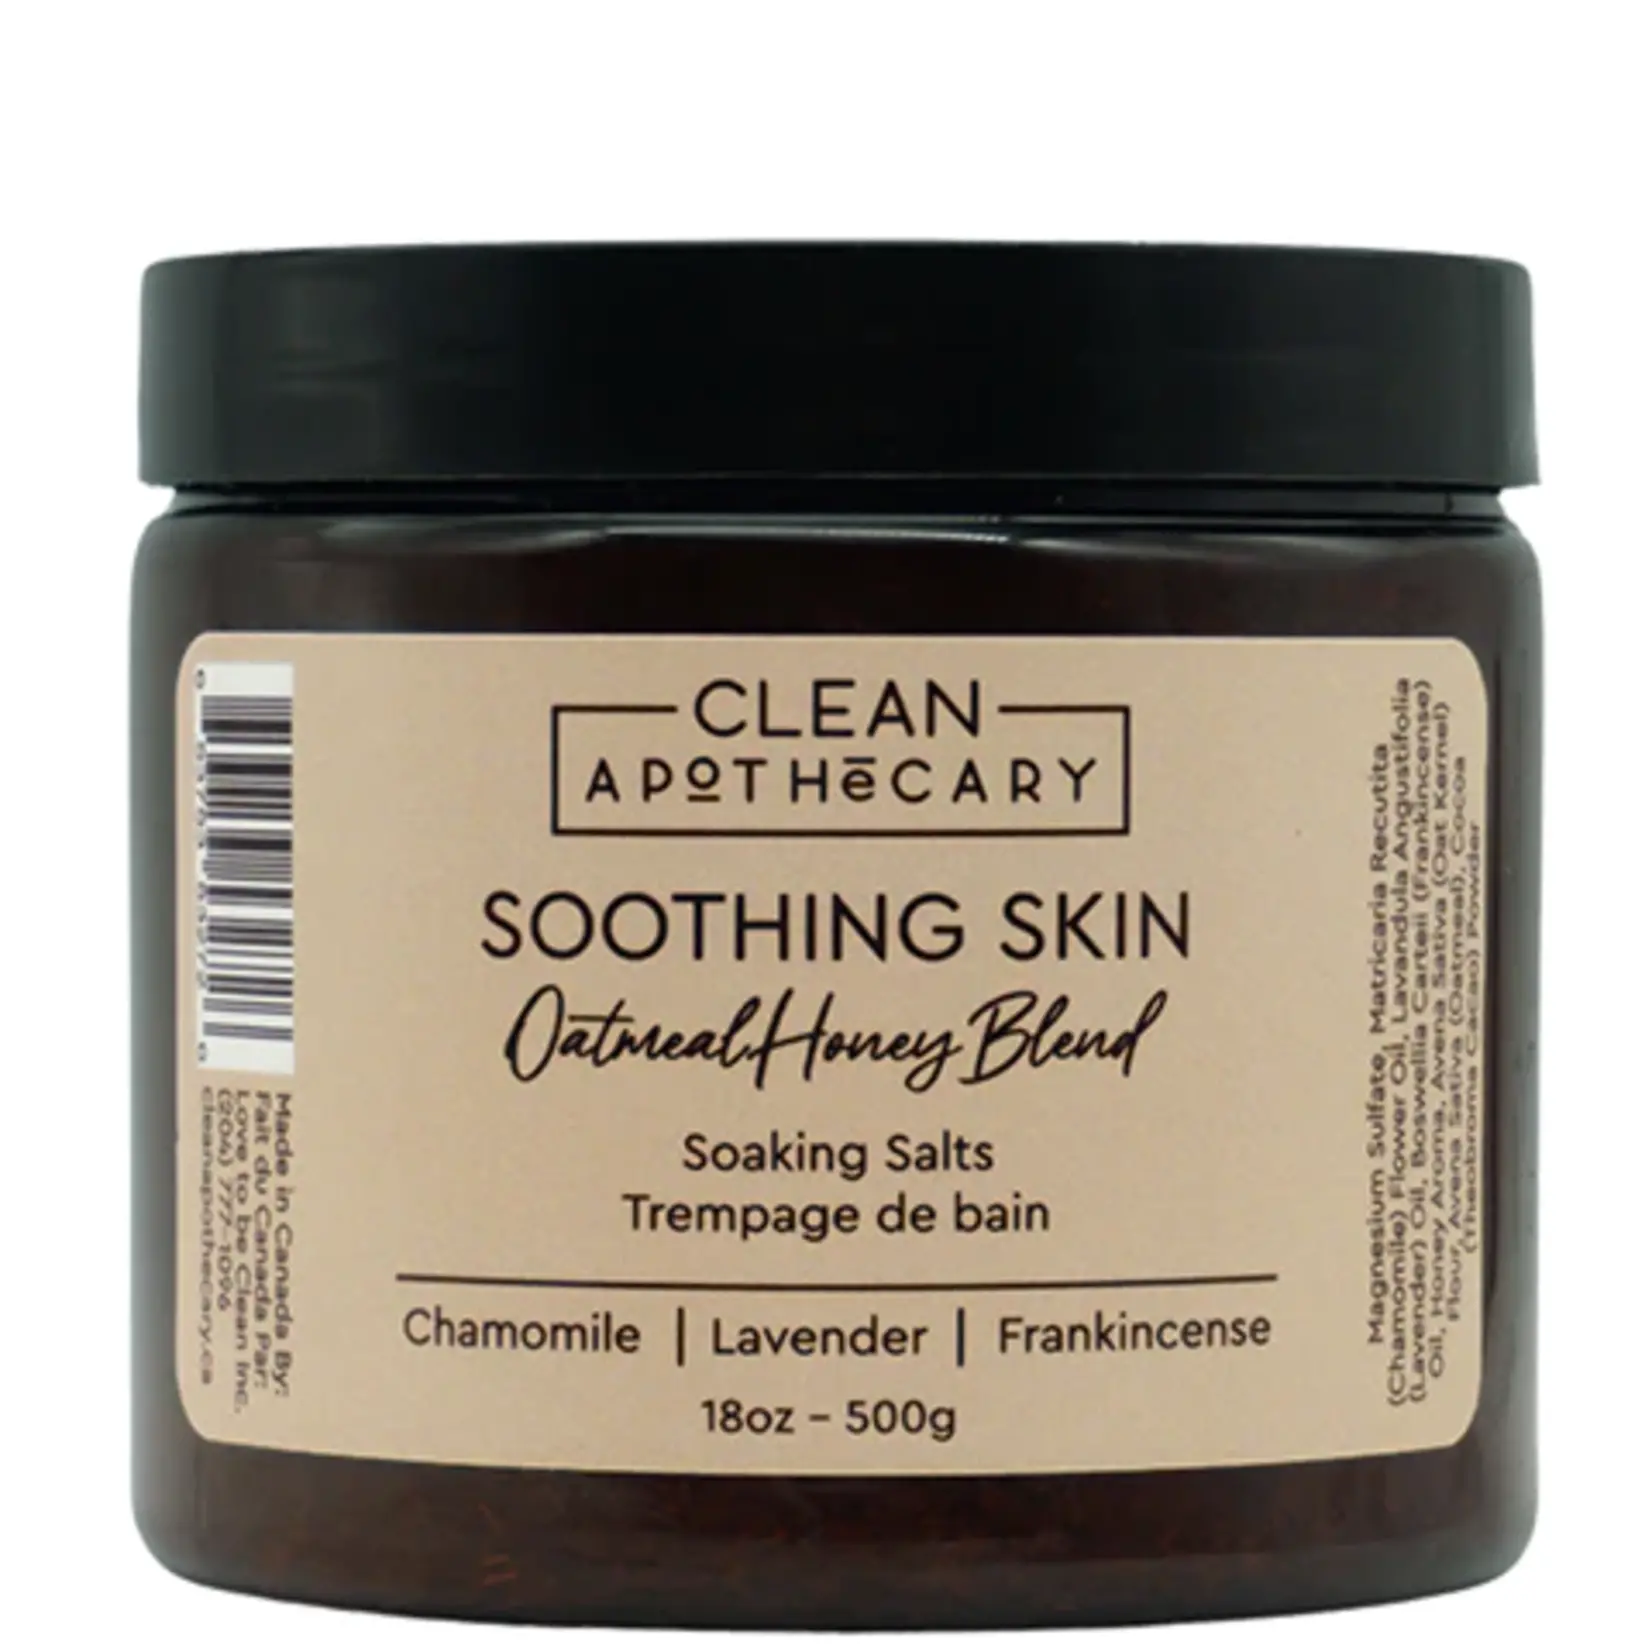 Clean Apothecary Soothing Skin Bath Salts